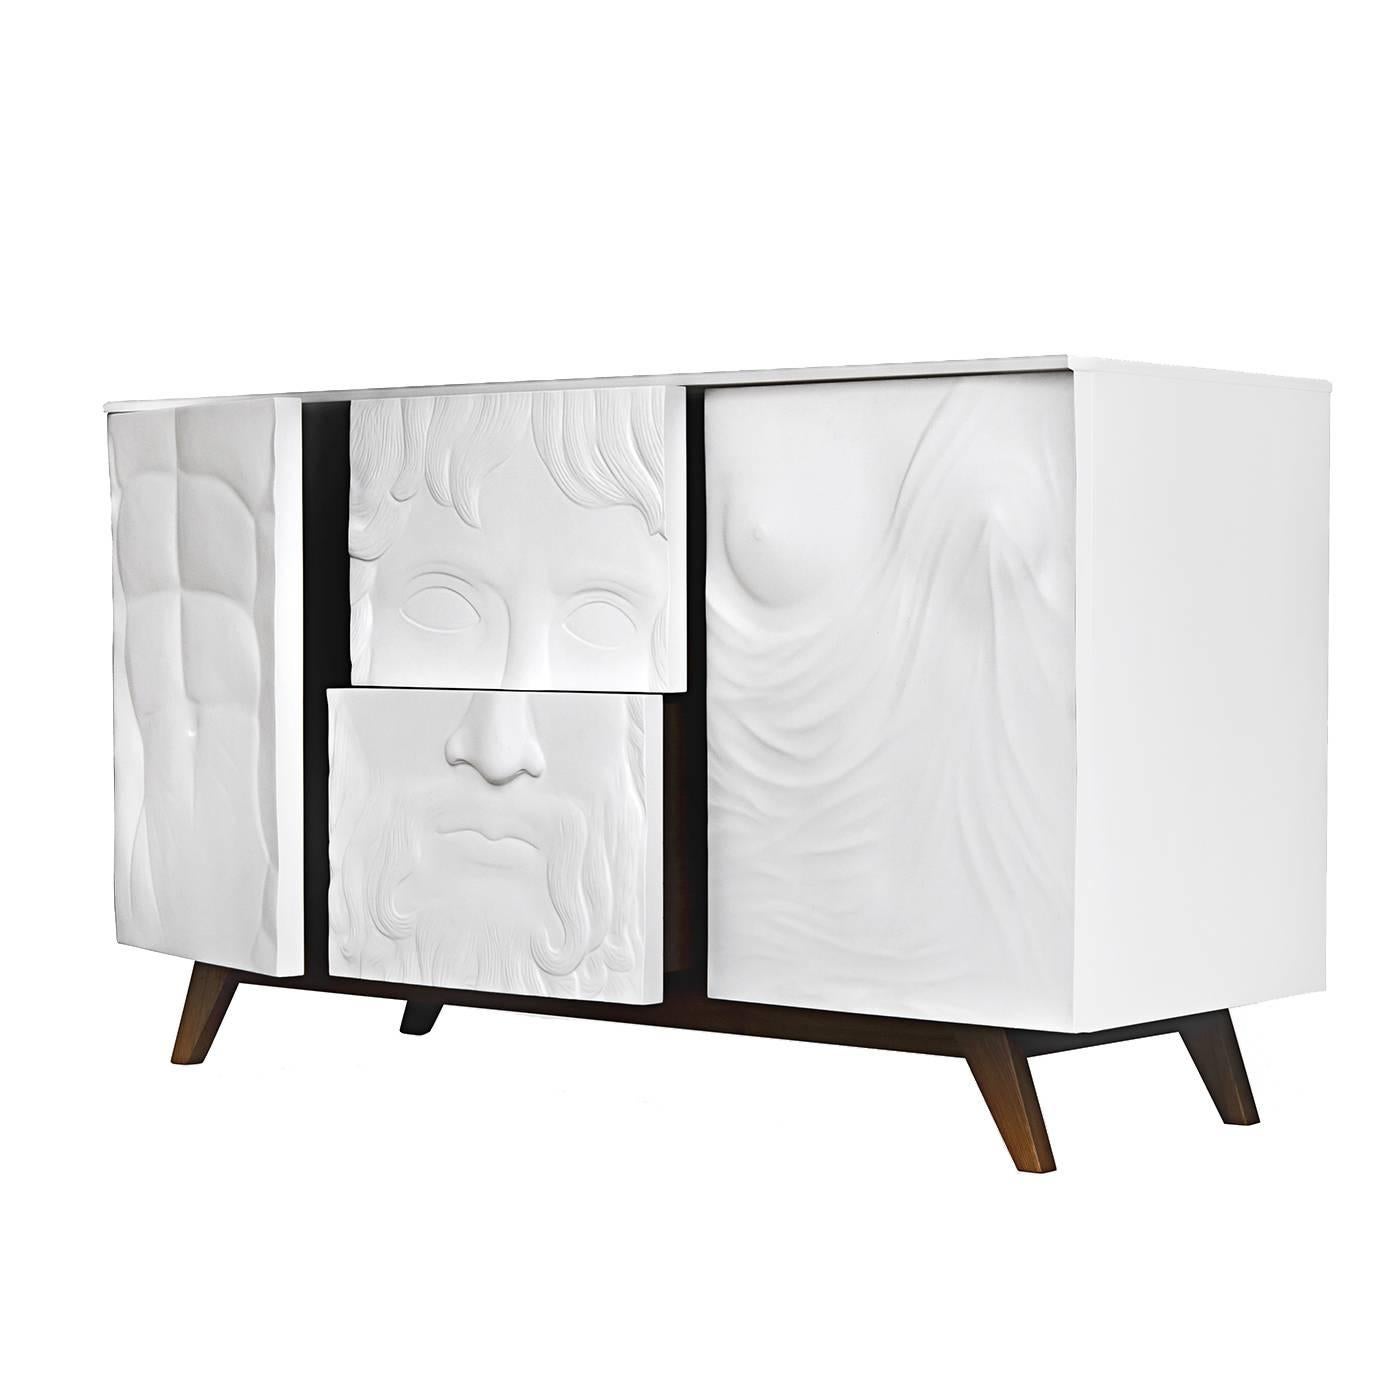 A celebration of classical art, this sideboard reinterprets the iconic ancient Greek and Roman sculptures in three stunning bas-reliefs adorning the panels at its front. The four slanted legs are made of wood with a dark walnut finish, supporting